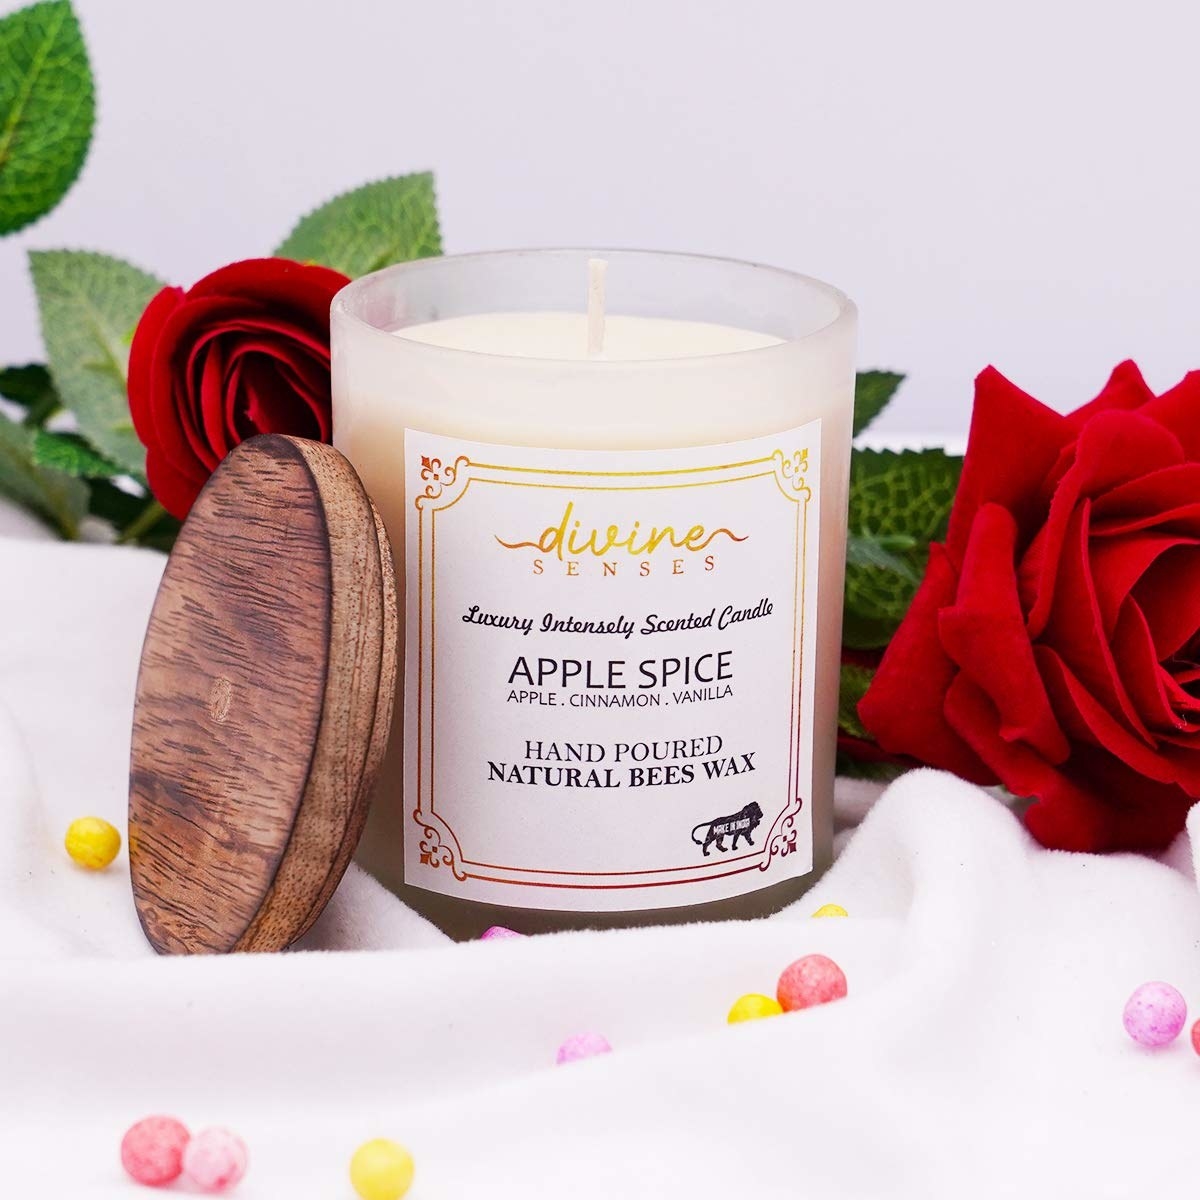 A hand-poured candle next to a rose with confetti balls